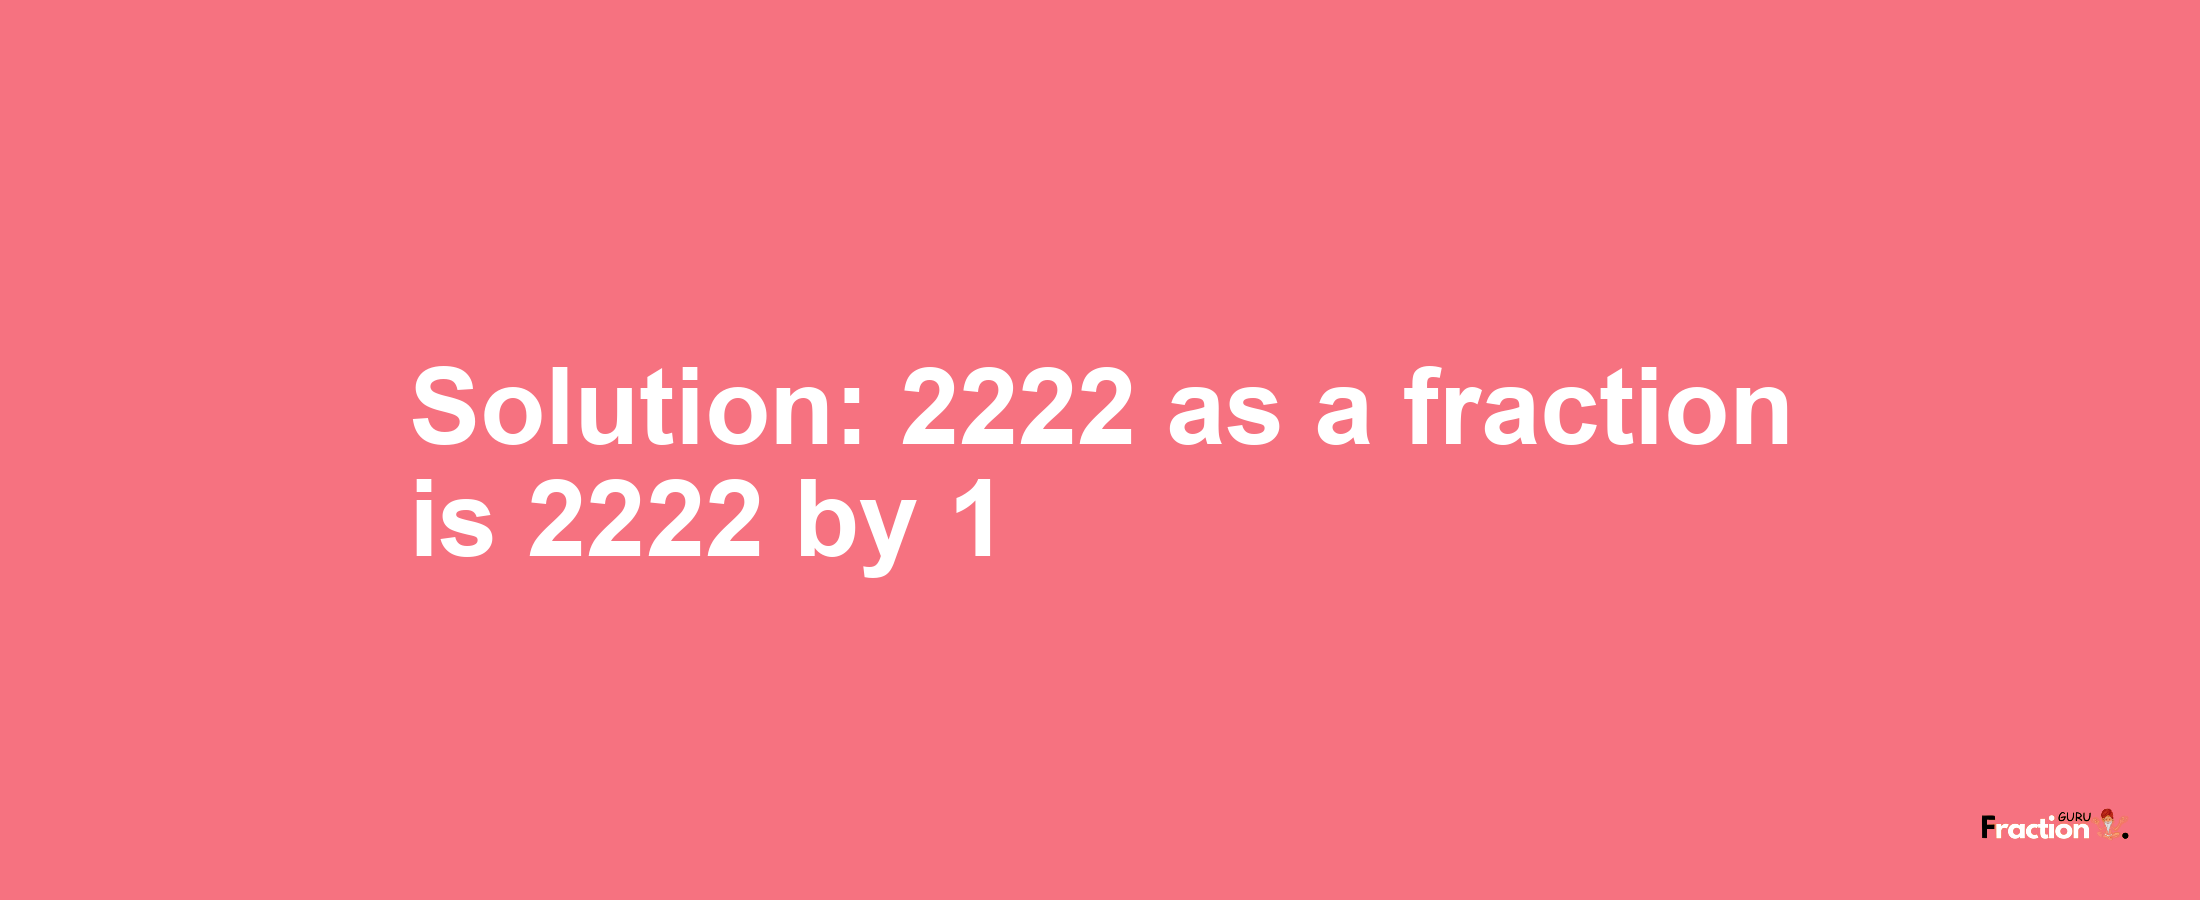 Solution:2222 as a fraction is 2222/1